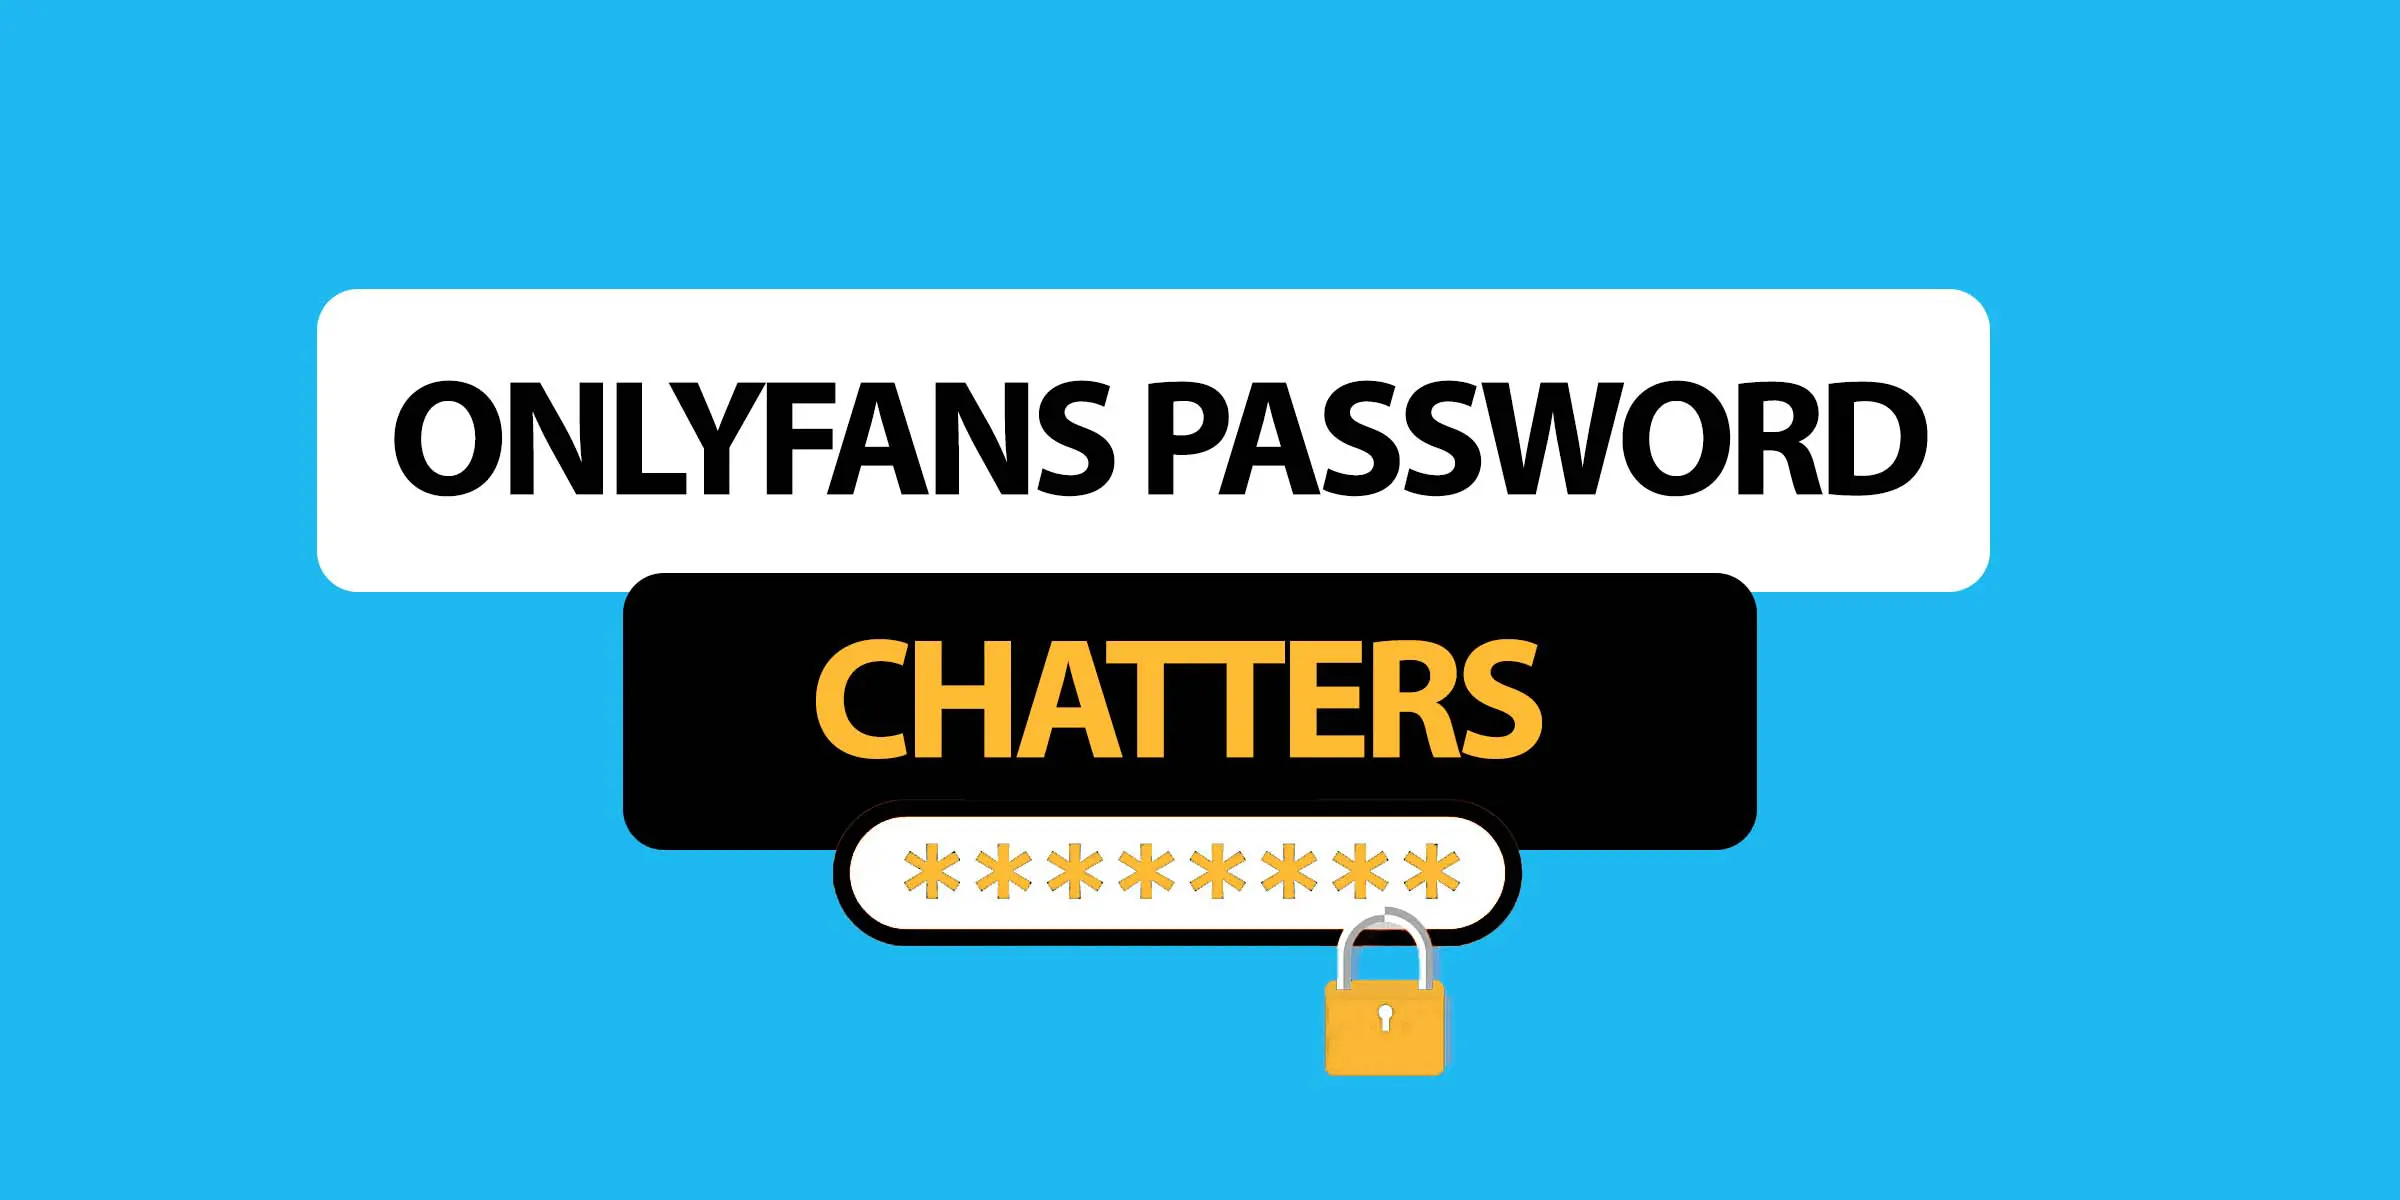 Enable access for Chatters on OnlyFans without sharing your Password